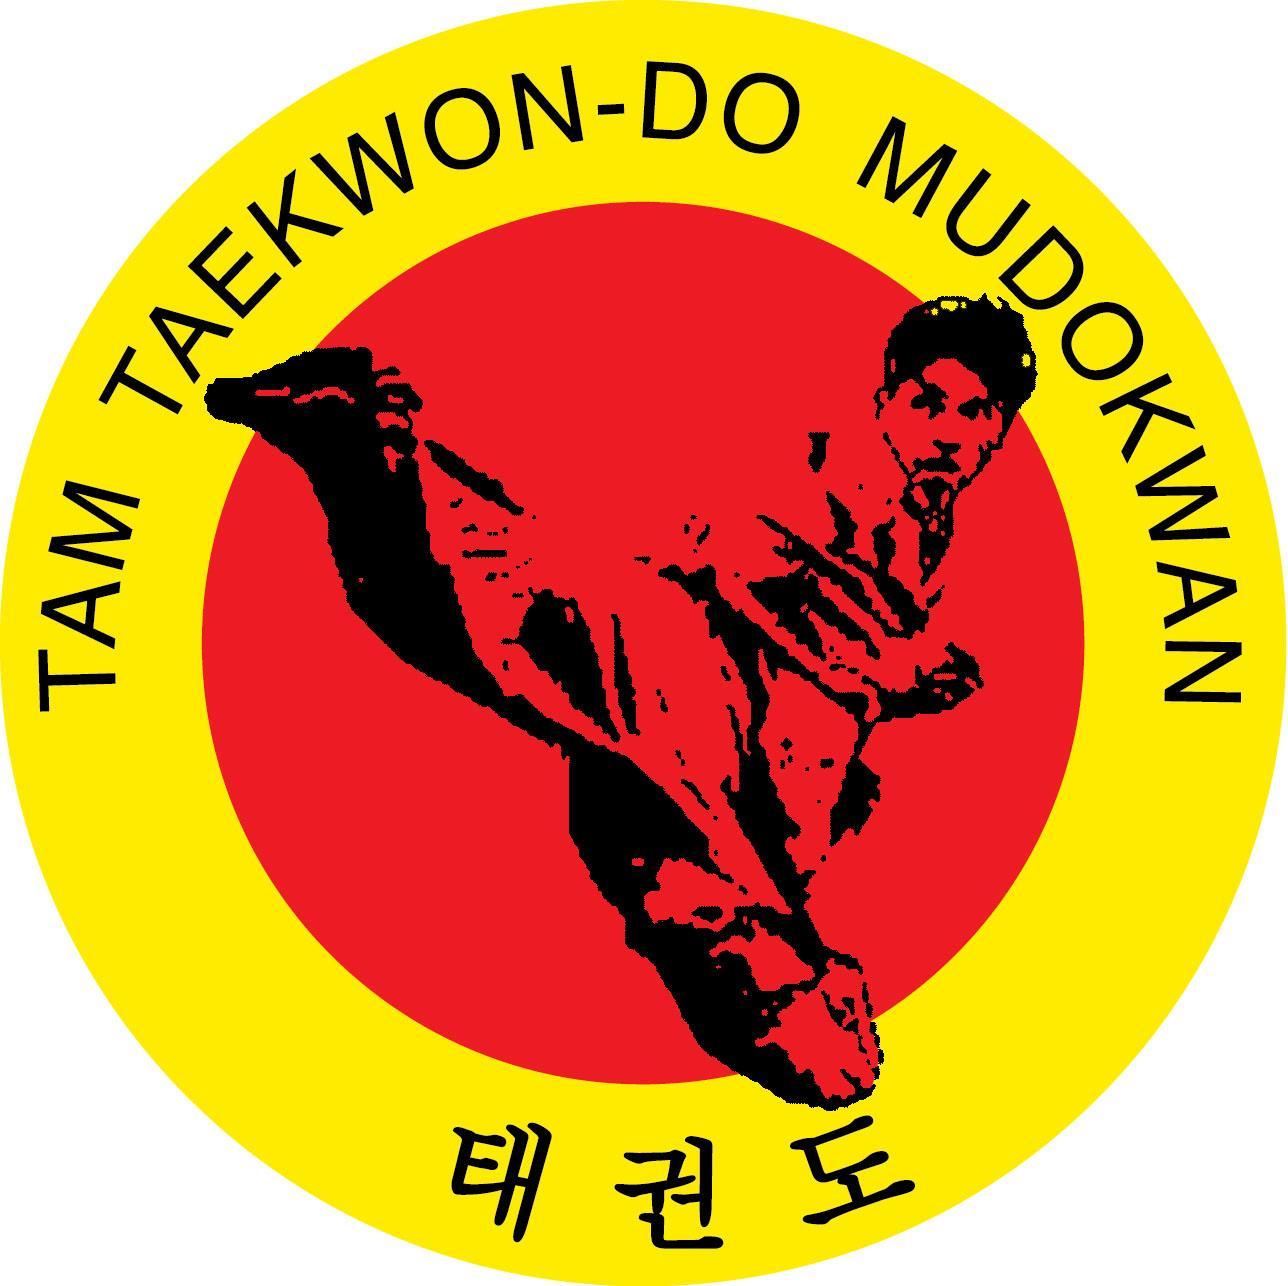 At TTM we teach the ITF style of Taekwon-Do in Sydney, Australia. Classes are run for beginners all the way through to the higher levels of black belt.